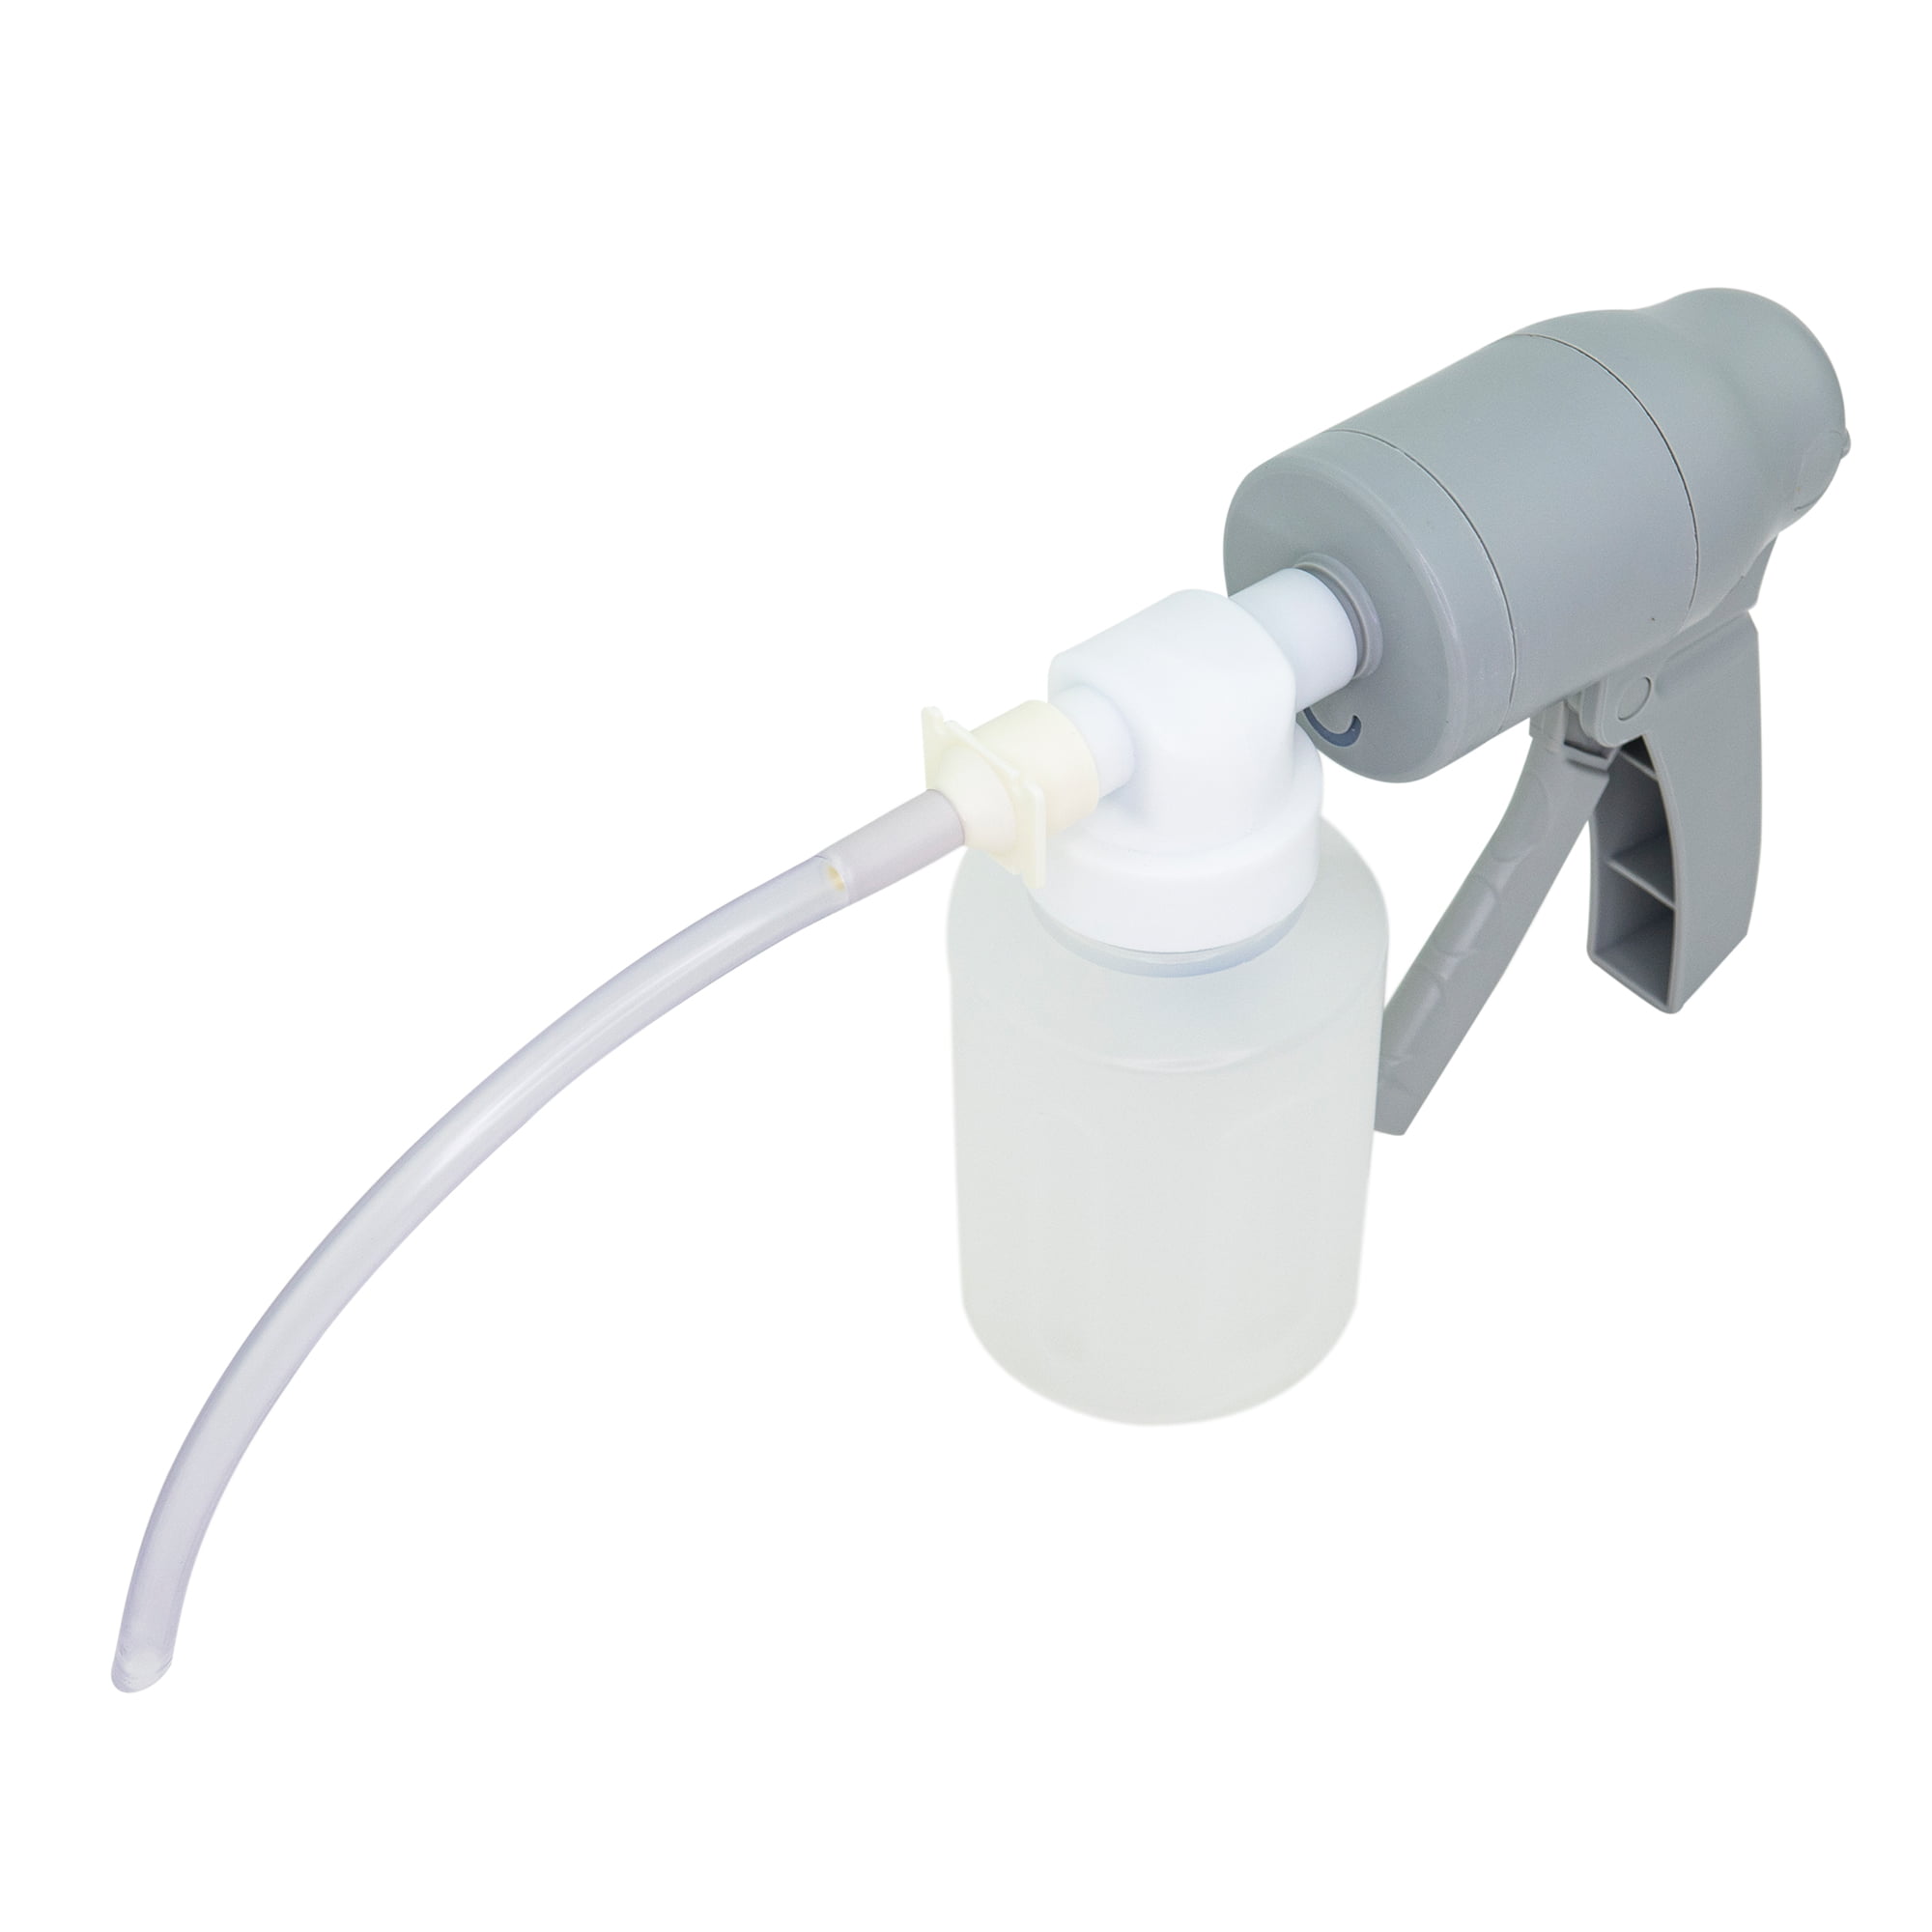 EMS - Manual Portable Suction Pump - Hand Operated Suction Pump - White - Walmart.com